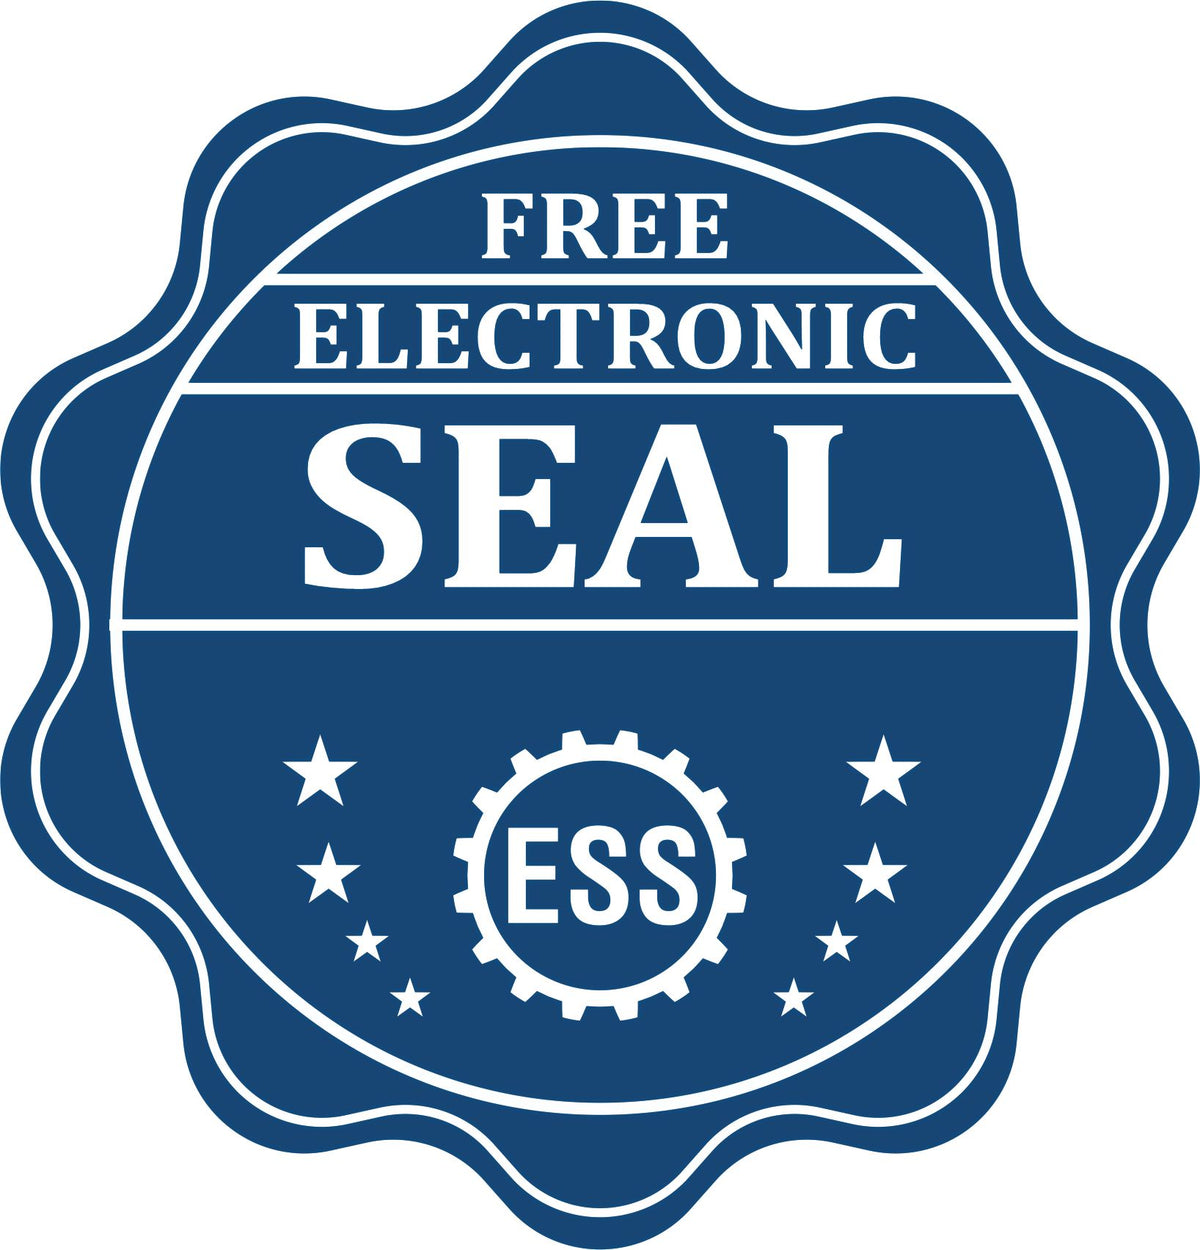 A badge showing a free electronic seal for the Slim Pre-Inked Alaska Land Surveyor Seal Stamp with stars and the ESS gear on the emblem.